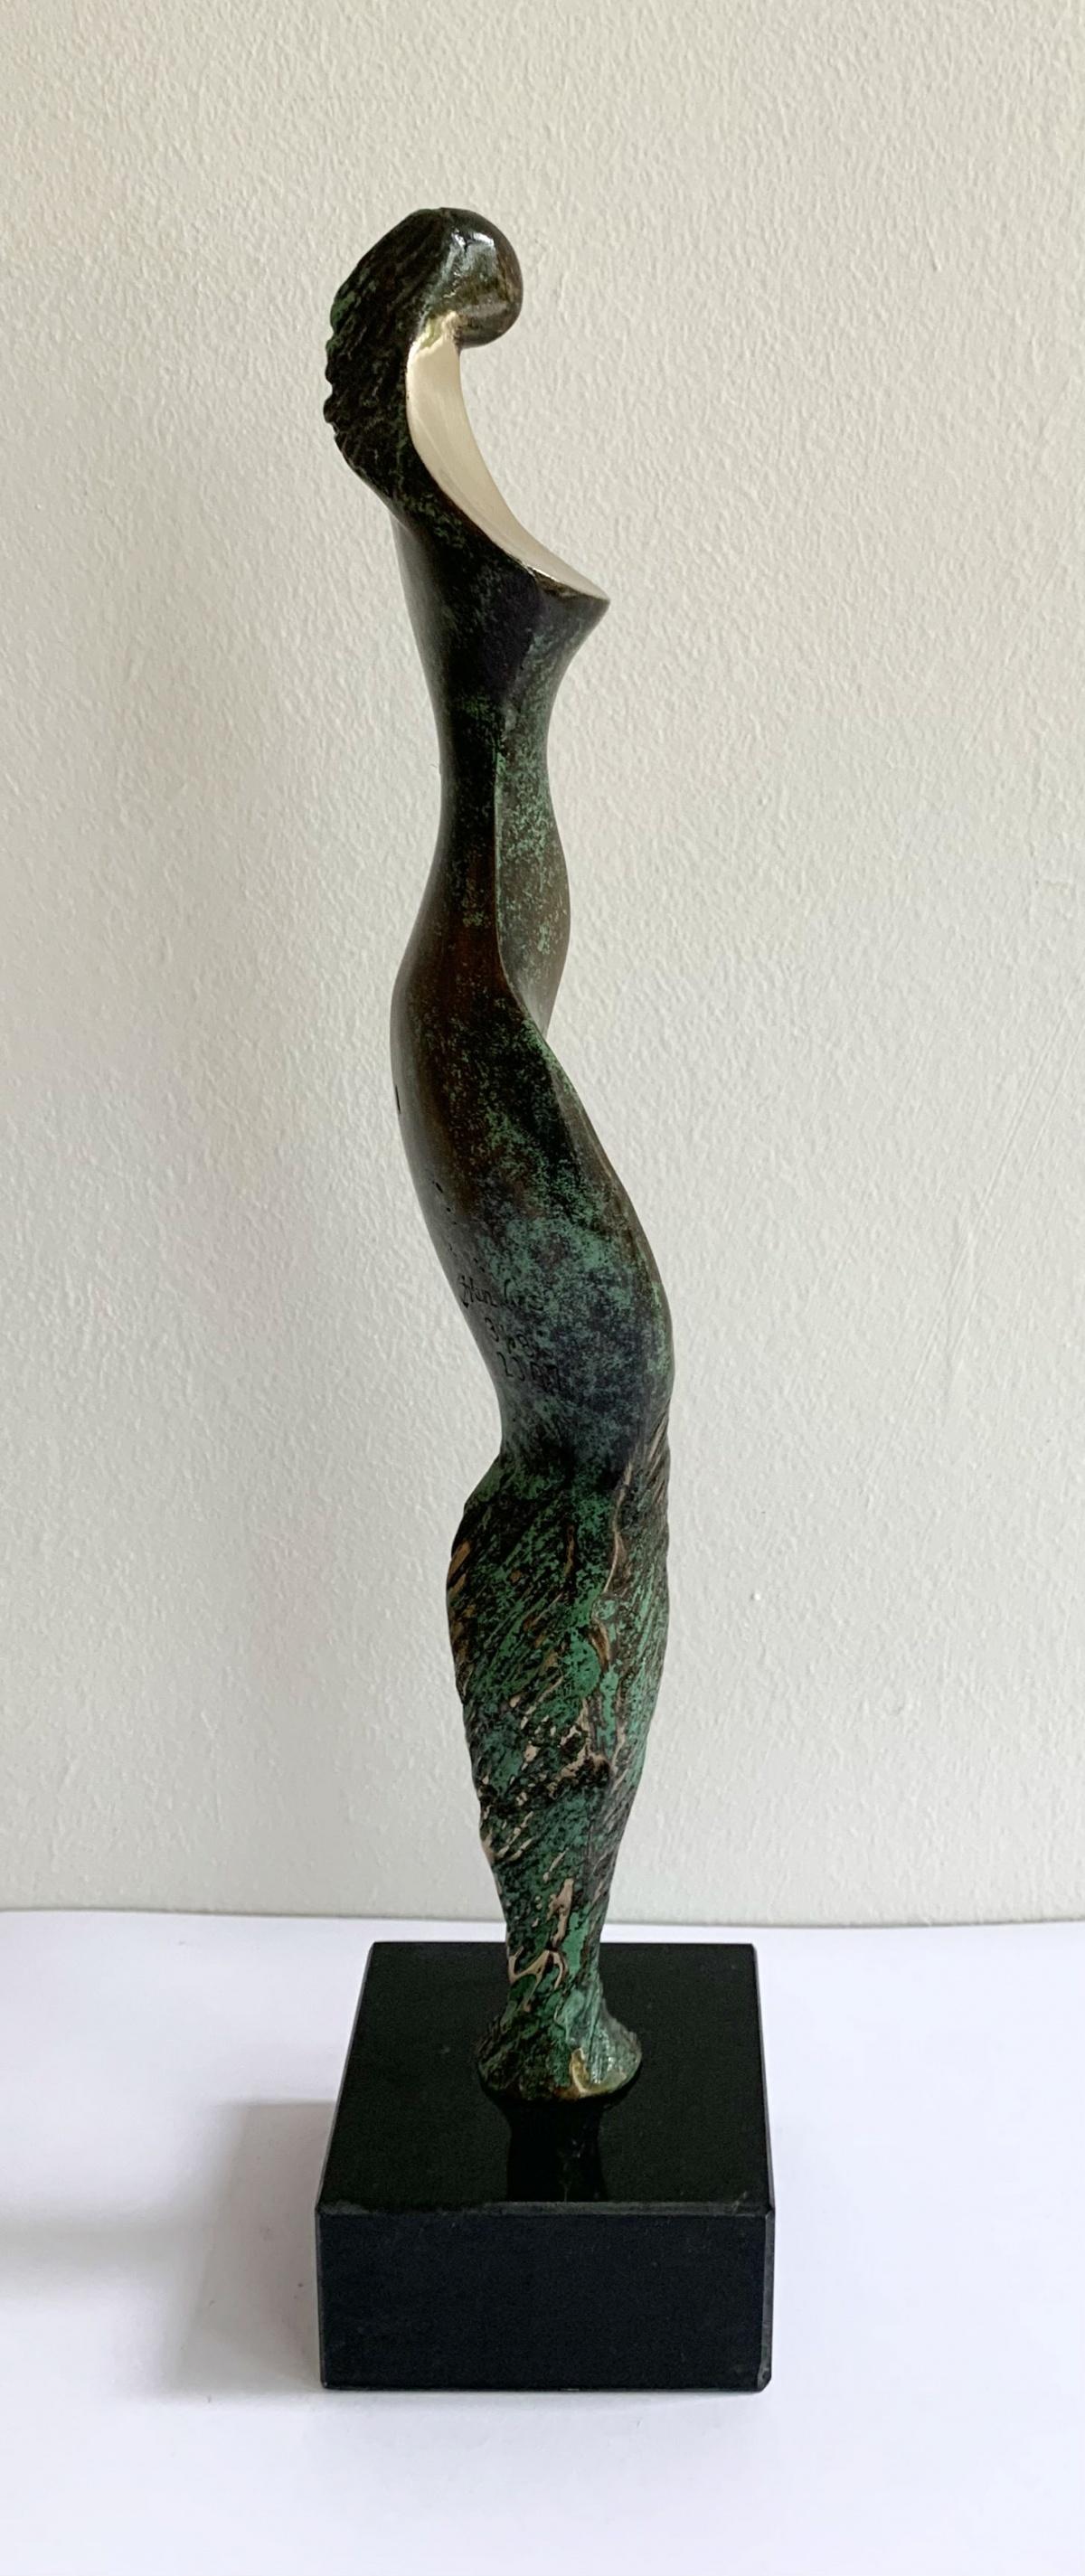 Nude - XXI century Contemporary bronze sculpture, Abstract & figurative - Gold Abstract Sculpture by Stanisław Wysocki